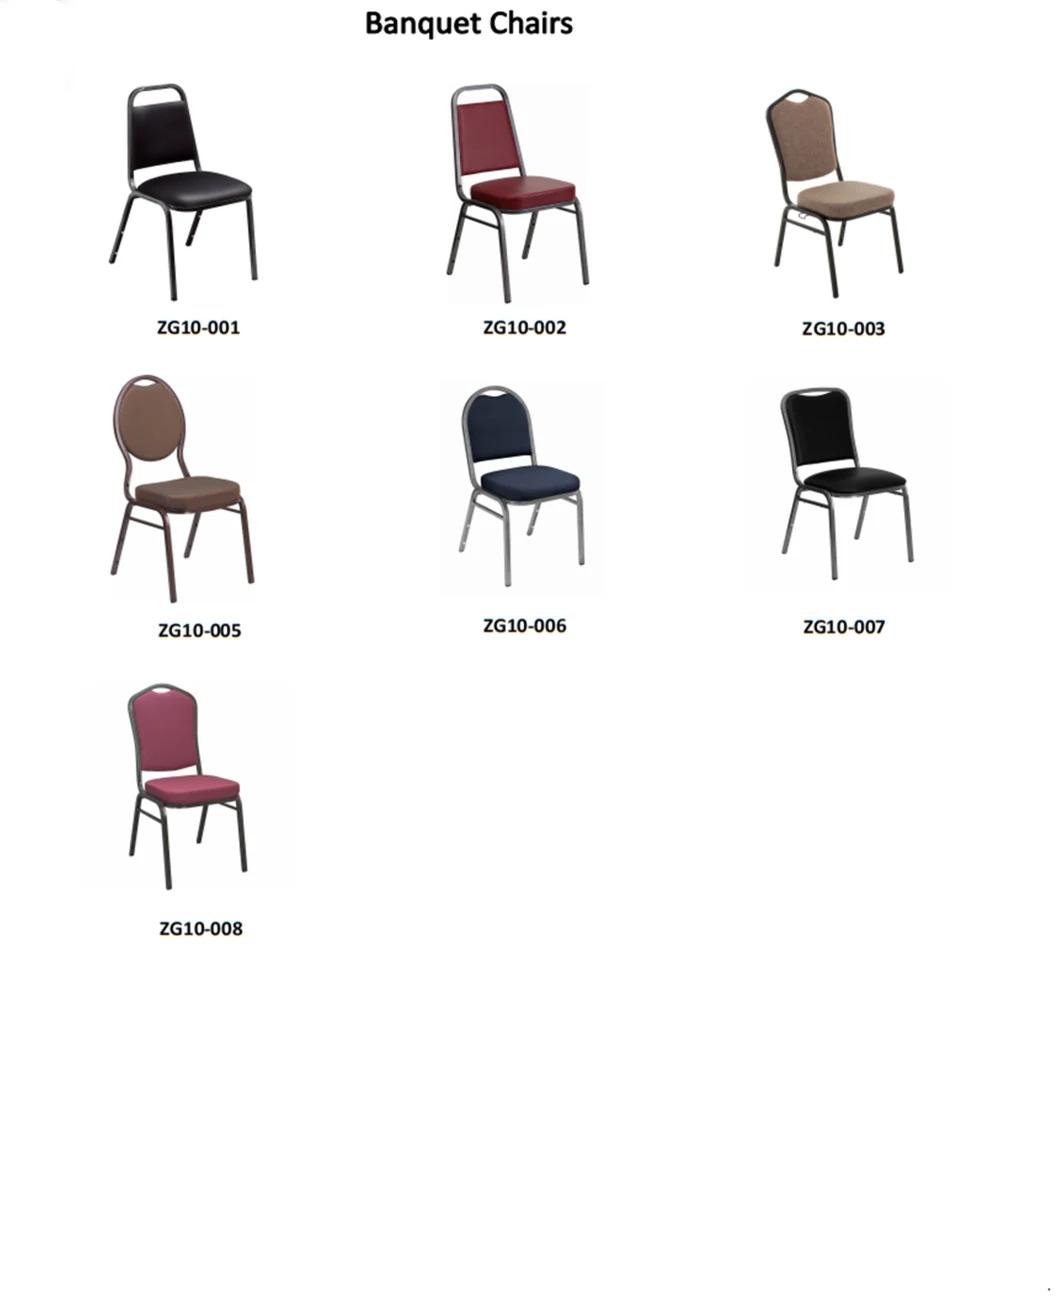 Professional Manufacturer of Crown Back Metal Banquet Chair with Ganing Device In Maroon Fabric (ZG10-003)